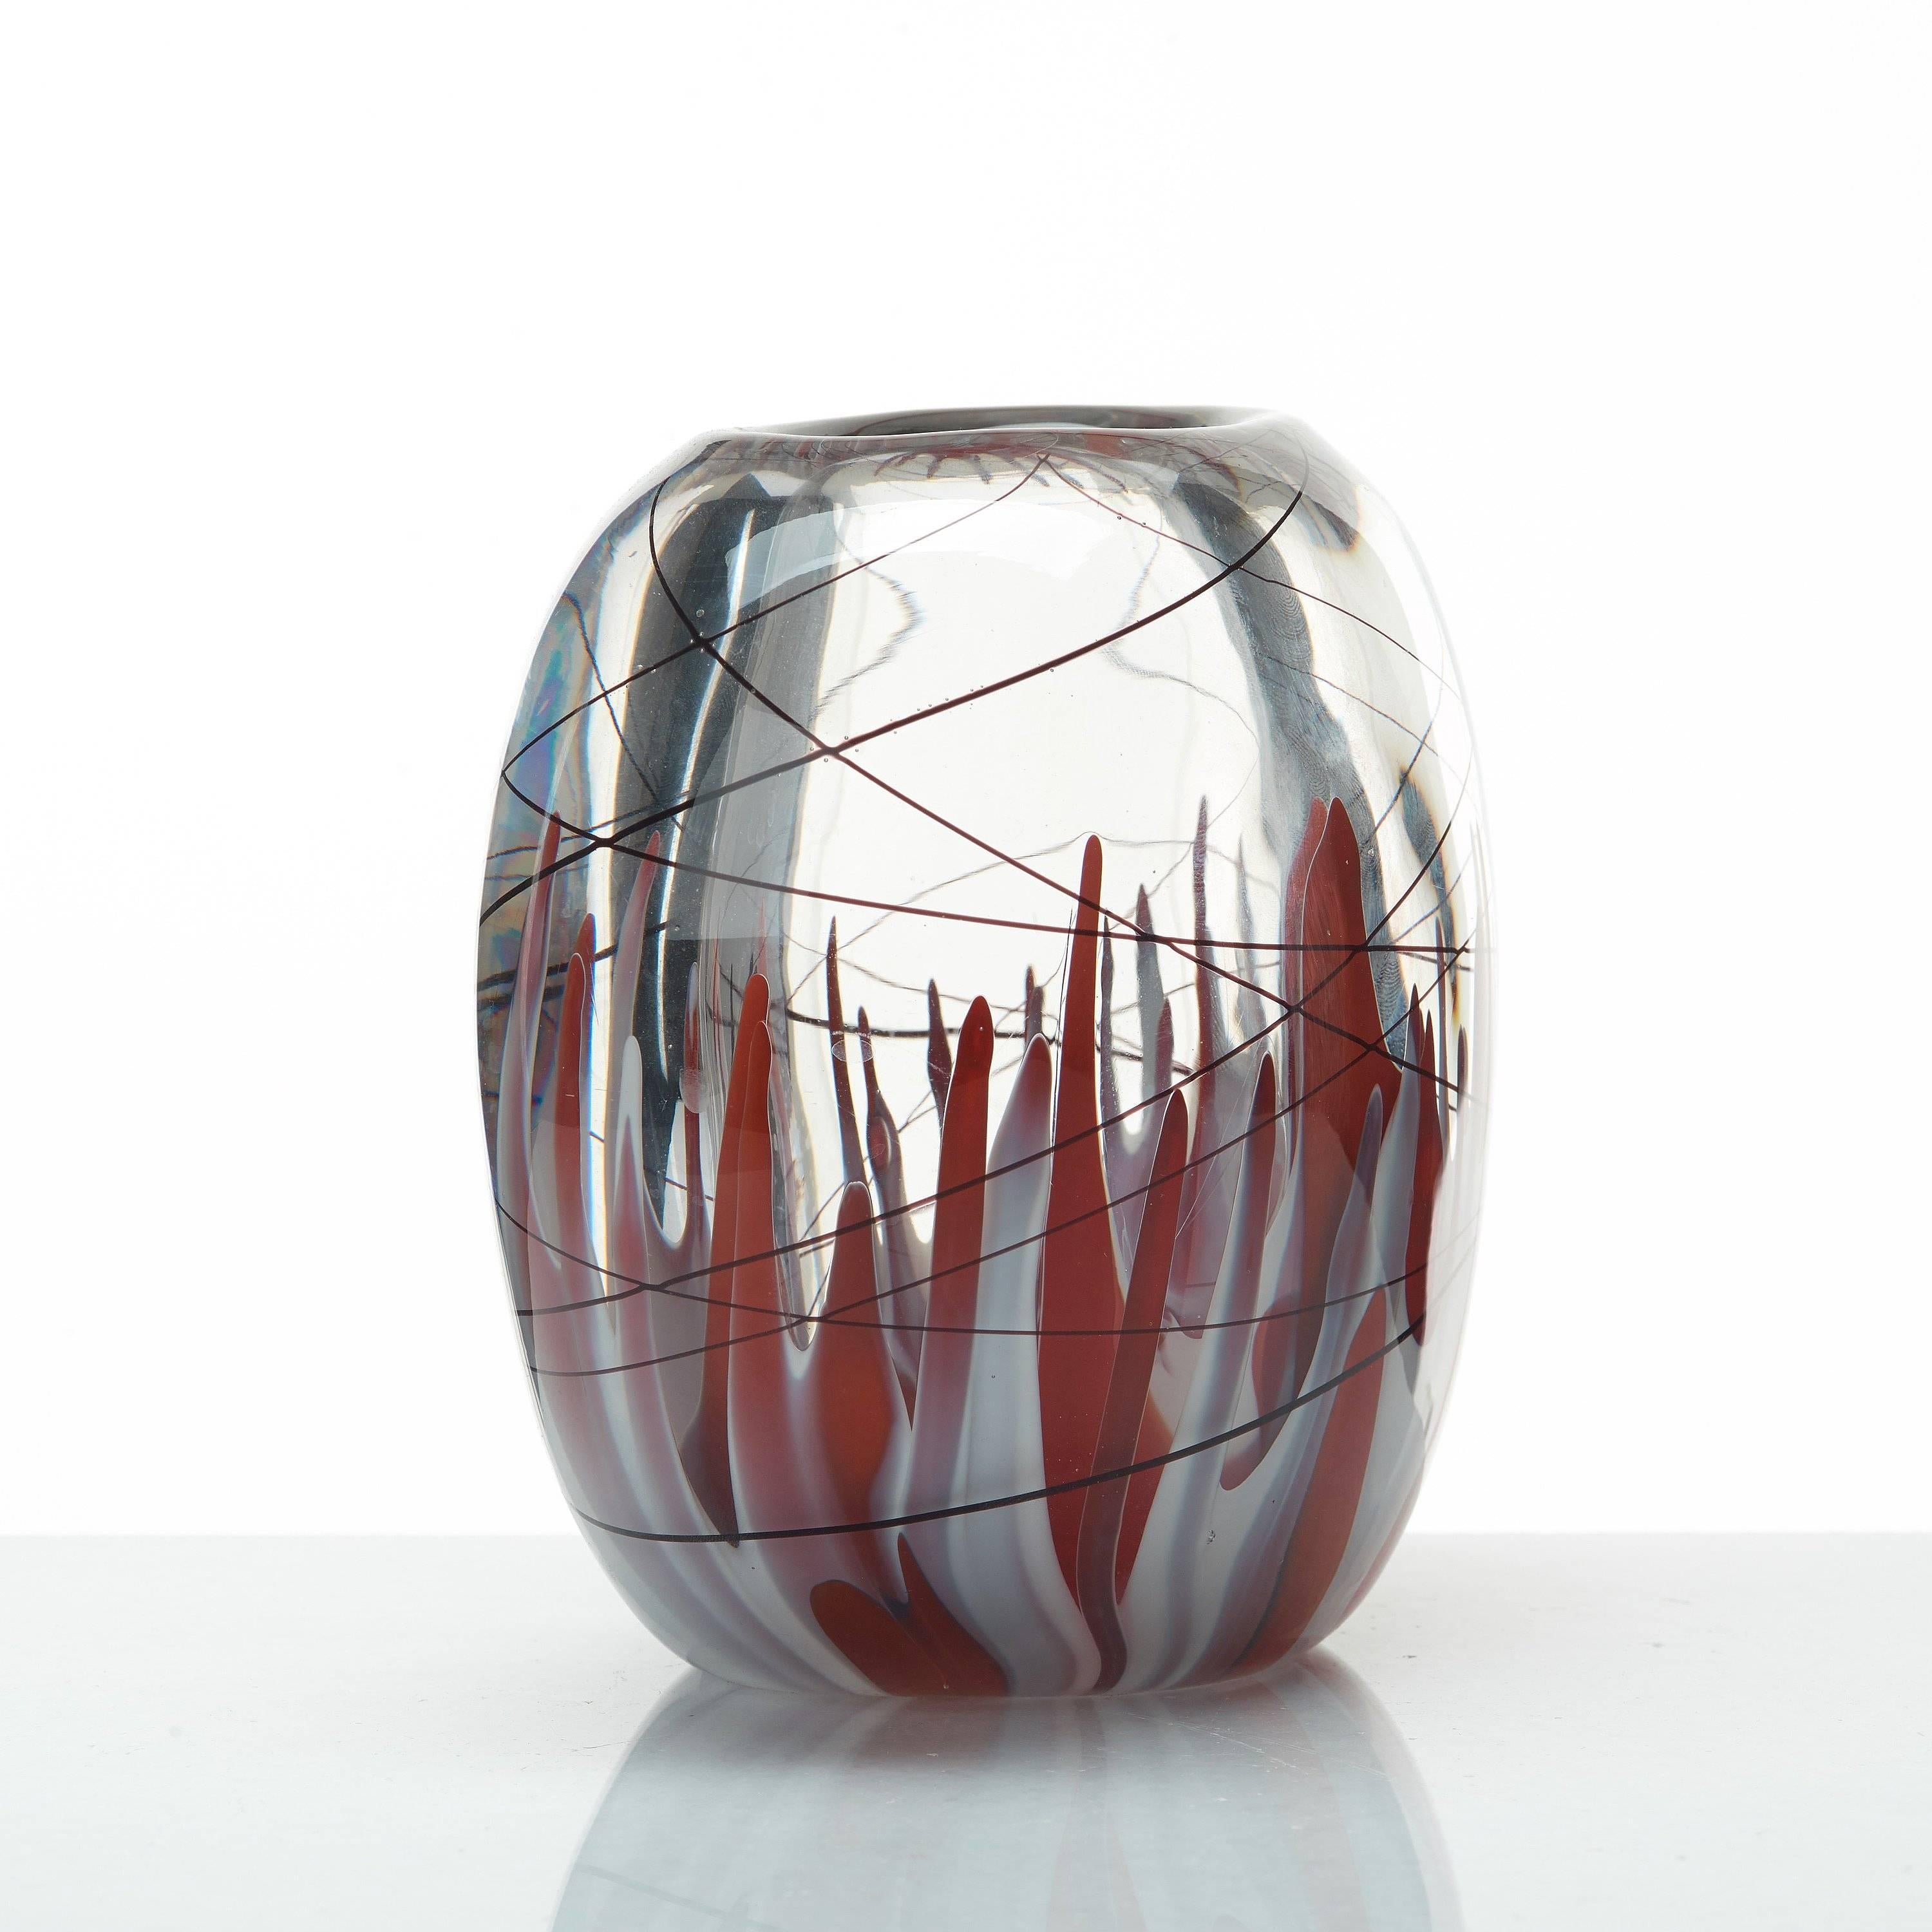 Swedish modern glass vase by Vicke Lindstrand with red and white underlay, 1950s.
Signed LH 1329 and with acid stamp LINDSTRAND Kosta.
Measures: Height 17cm/6.7? and wide 19cm/7.5 and diameter 12.5cm/4.9?.